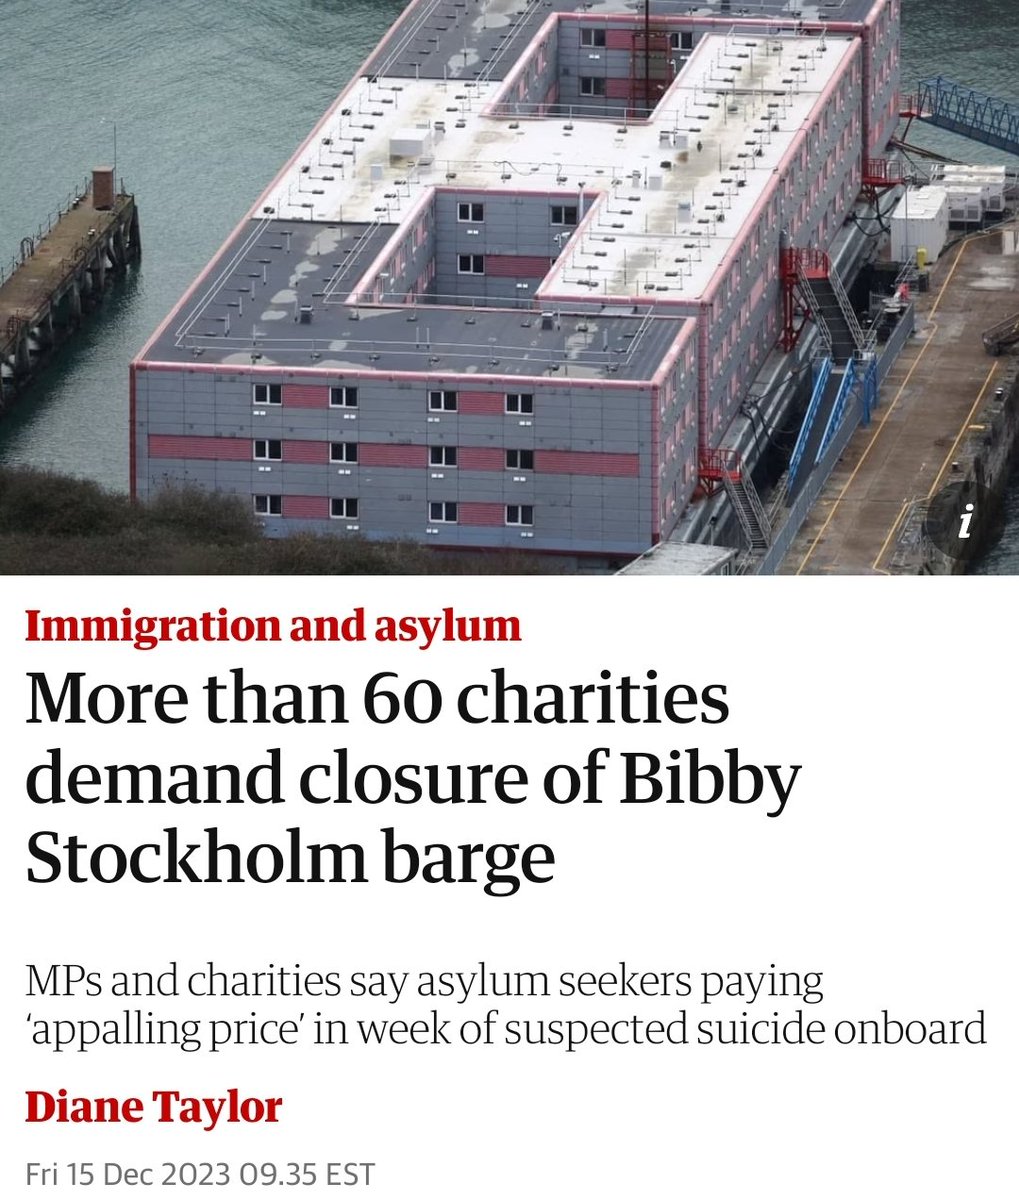 More than 60 charities demand closure of Bibby Stockholm barge Should the barge be closed or the 60 charities be closed? Are charities now a front to the far Left organised invasion of the UK?